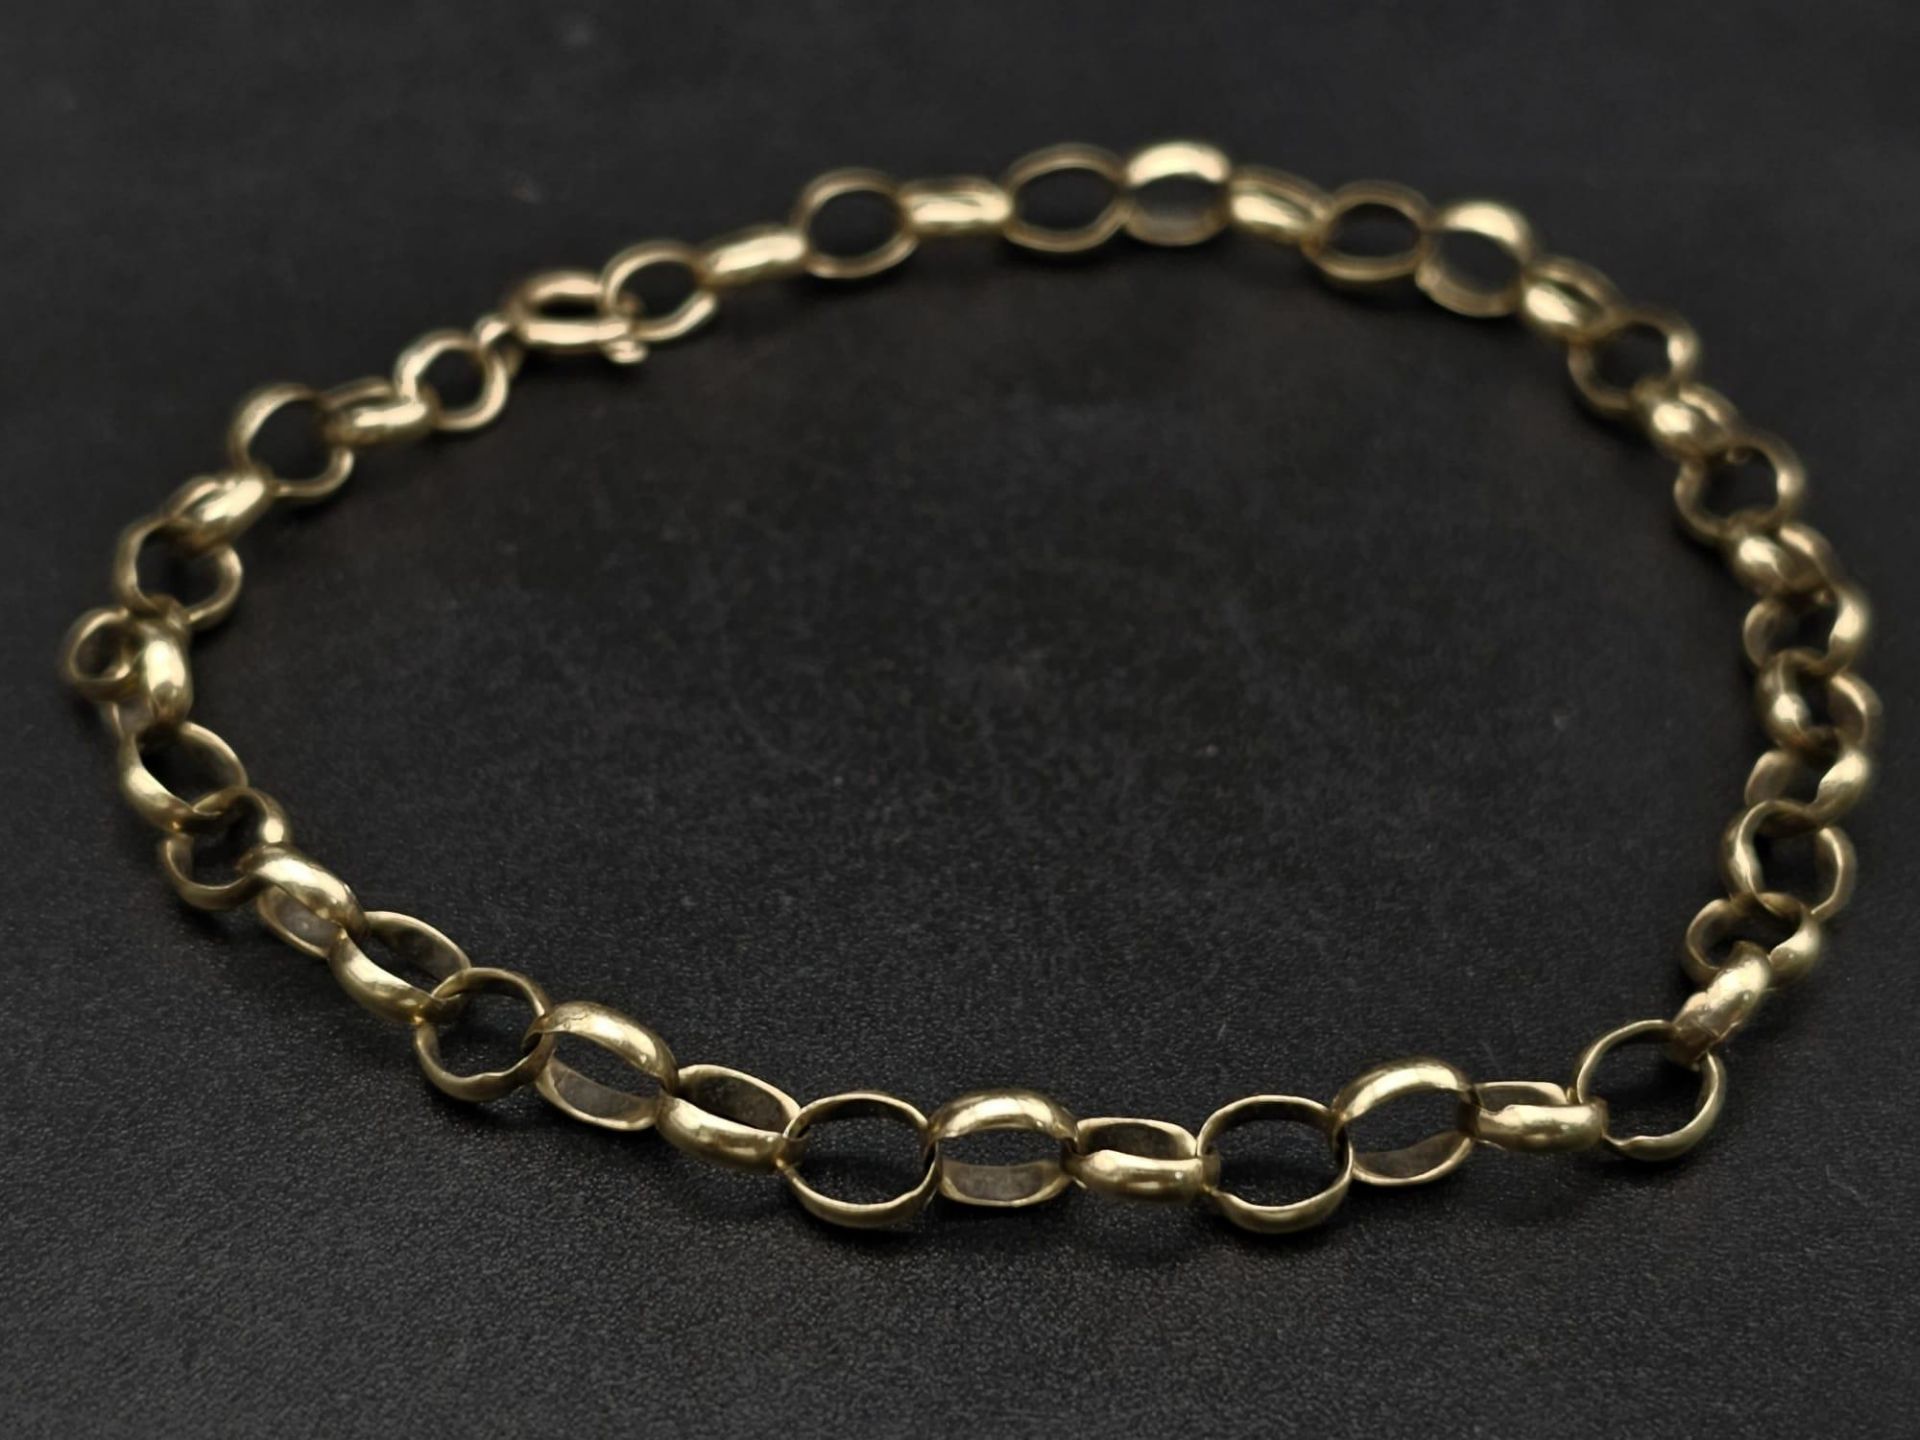 A Vintage 9K Yellow Gold Oval Link Bracelet. 19cm. 4.1g total weight.